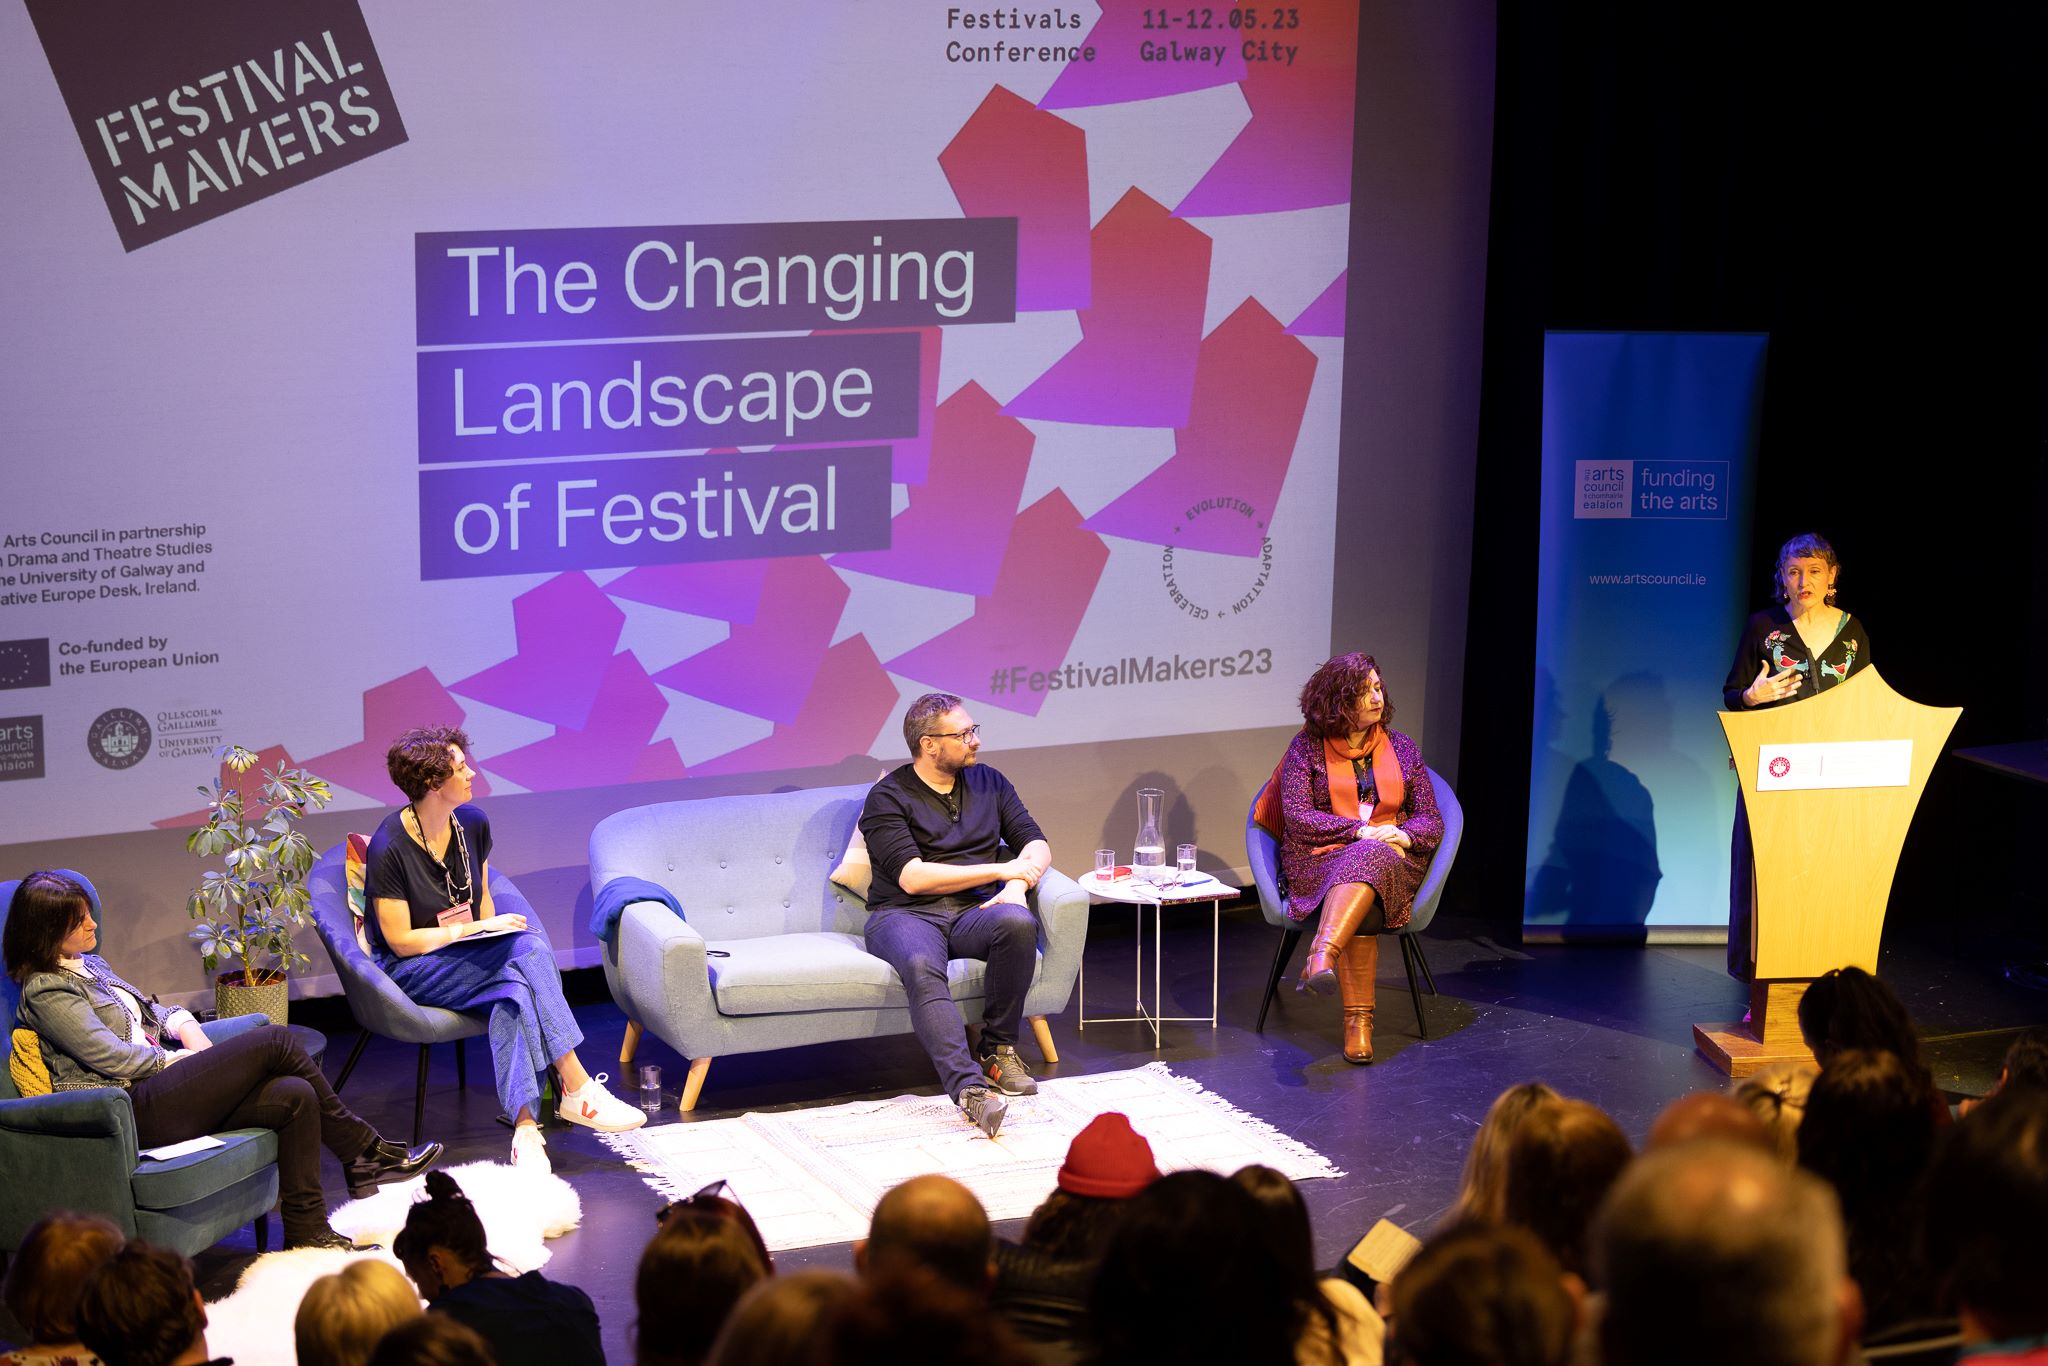 Kath Gorman, Aislinn O’hEocha, Andy Brydon, Gerardette Bailey and Tara McGowan at the Building Partnerships in Festival Practice – How partnerships can sustain and develop festival models panel in the